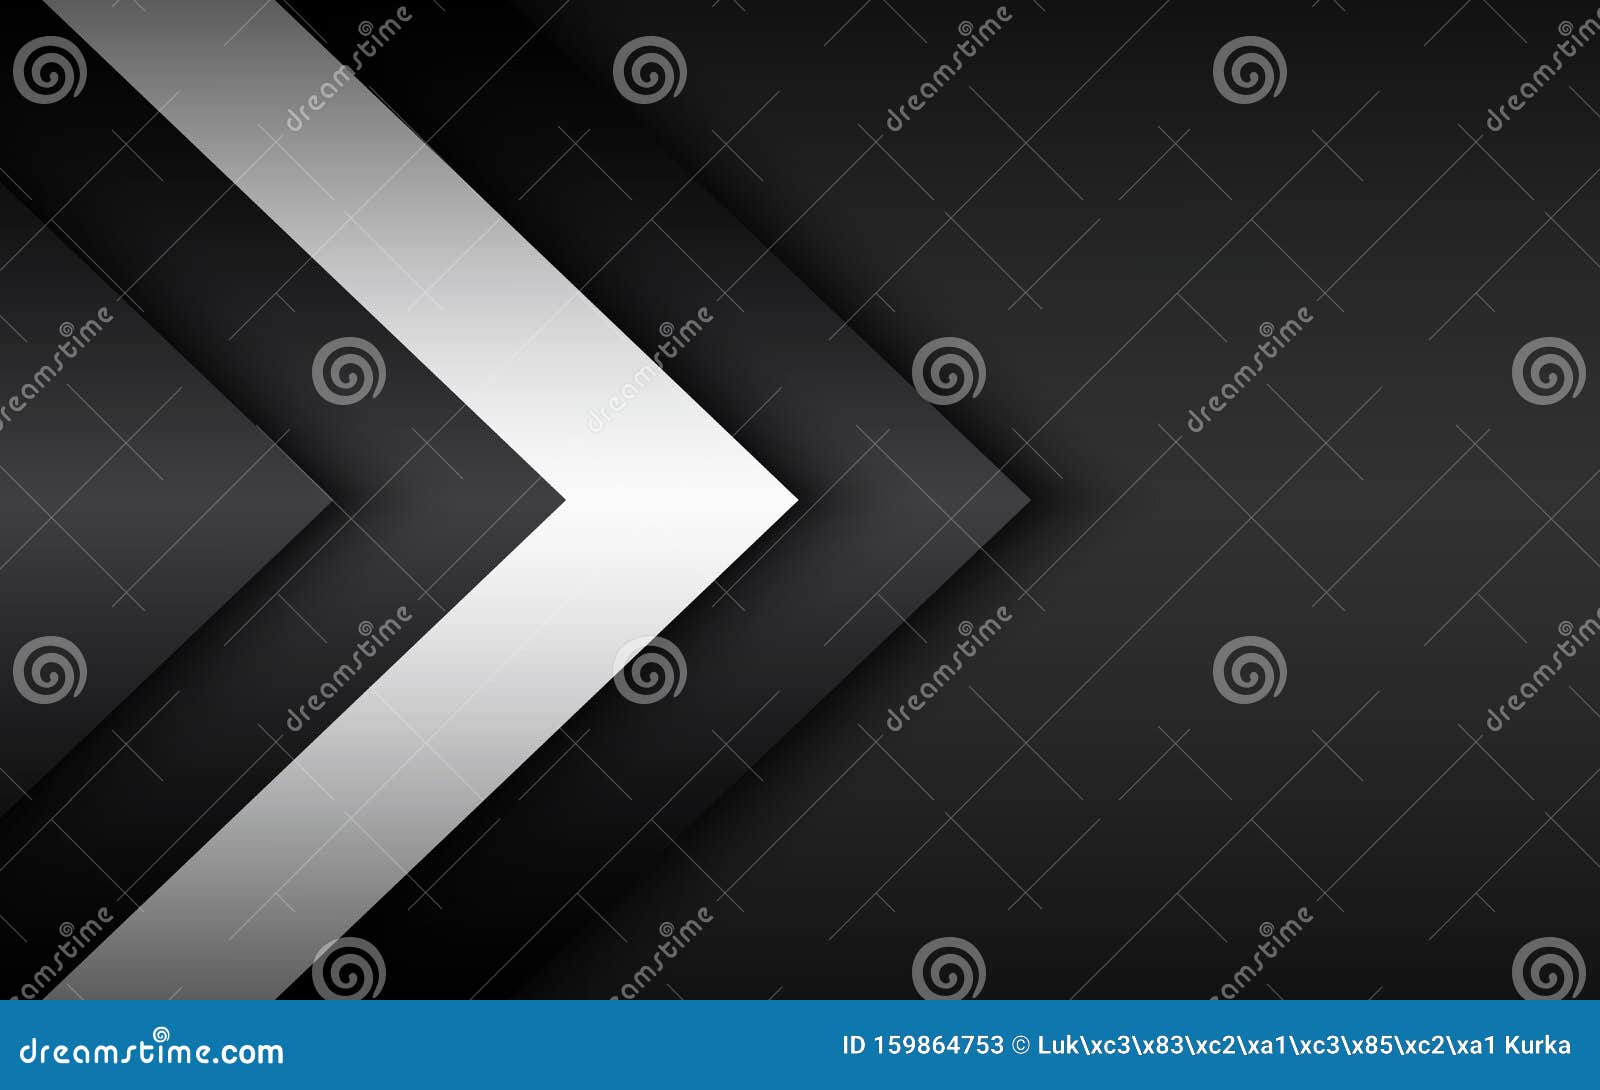 black and white overlayed arrows, abstract modern  background with place for your text, material 